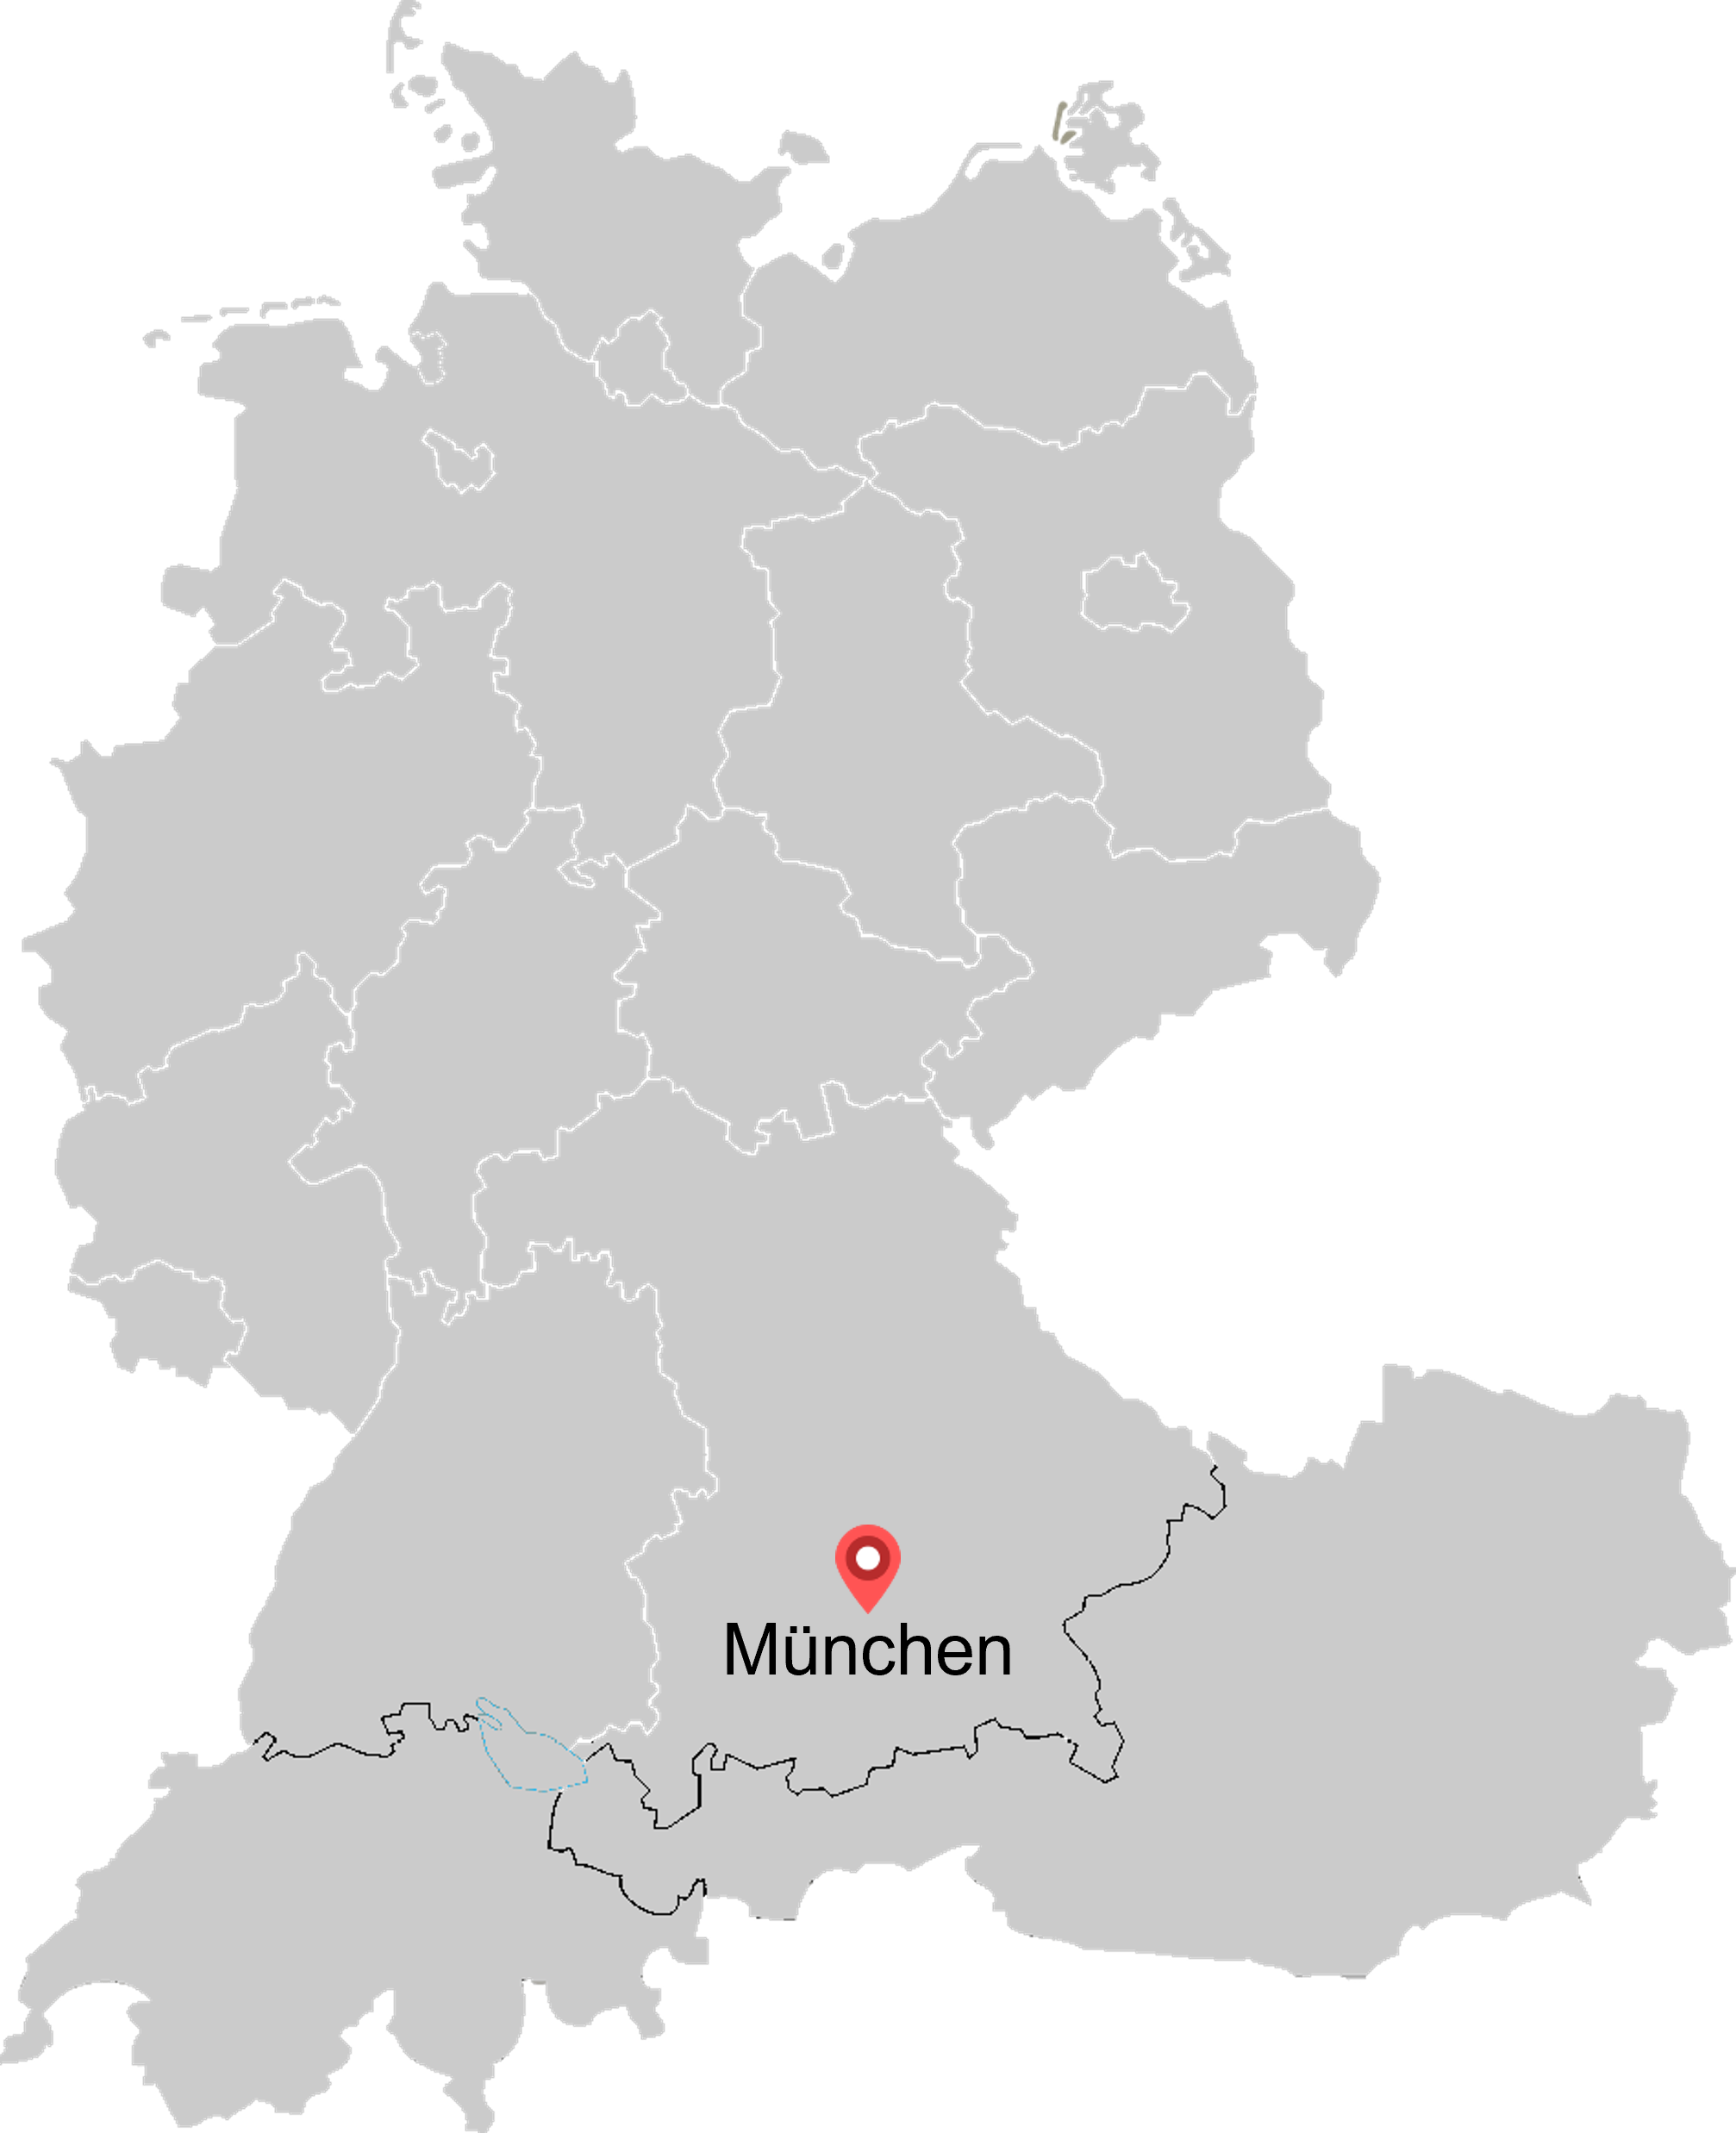 Locations of OC&C in Germany and other countries